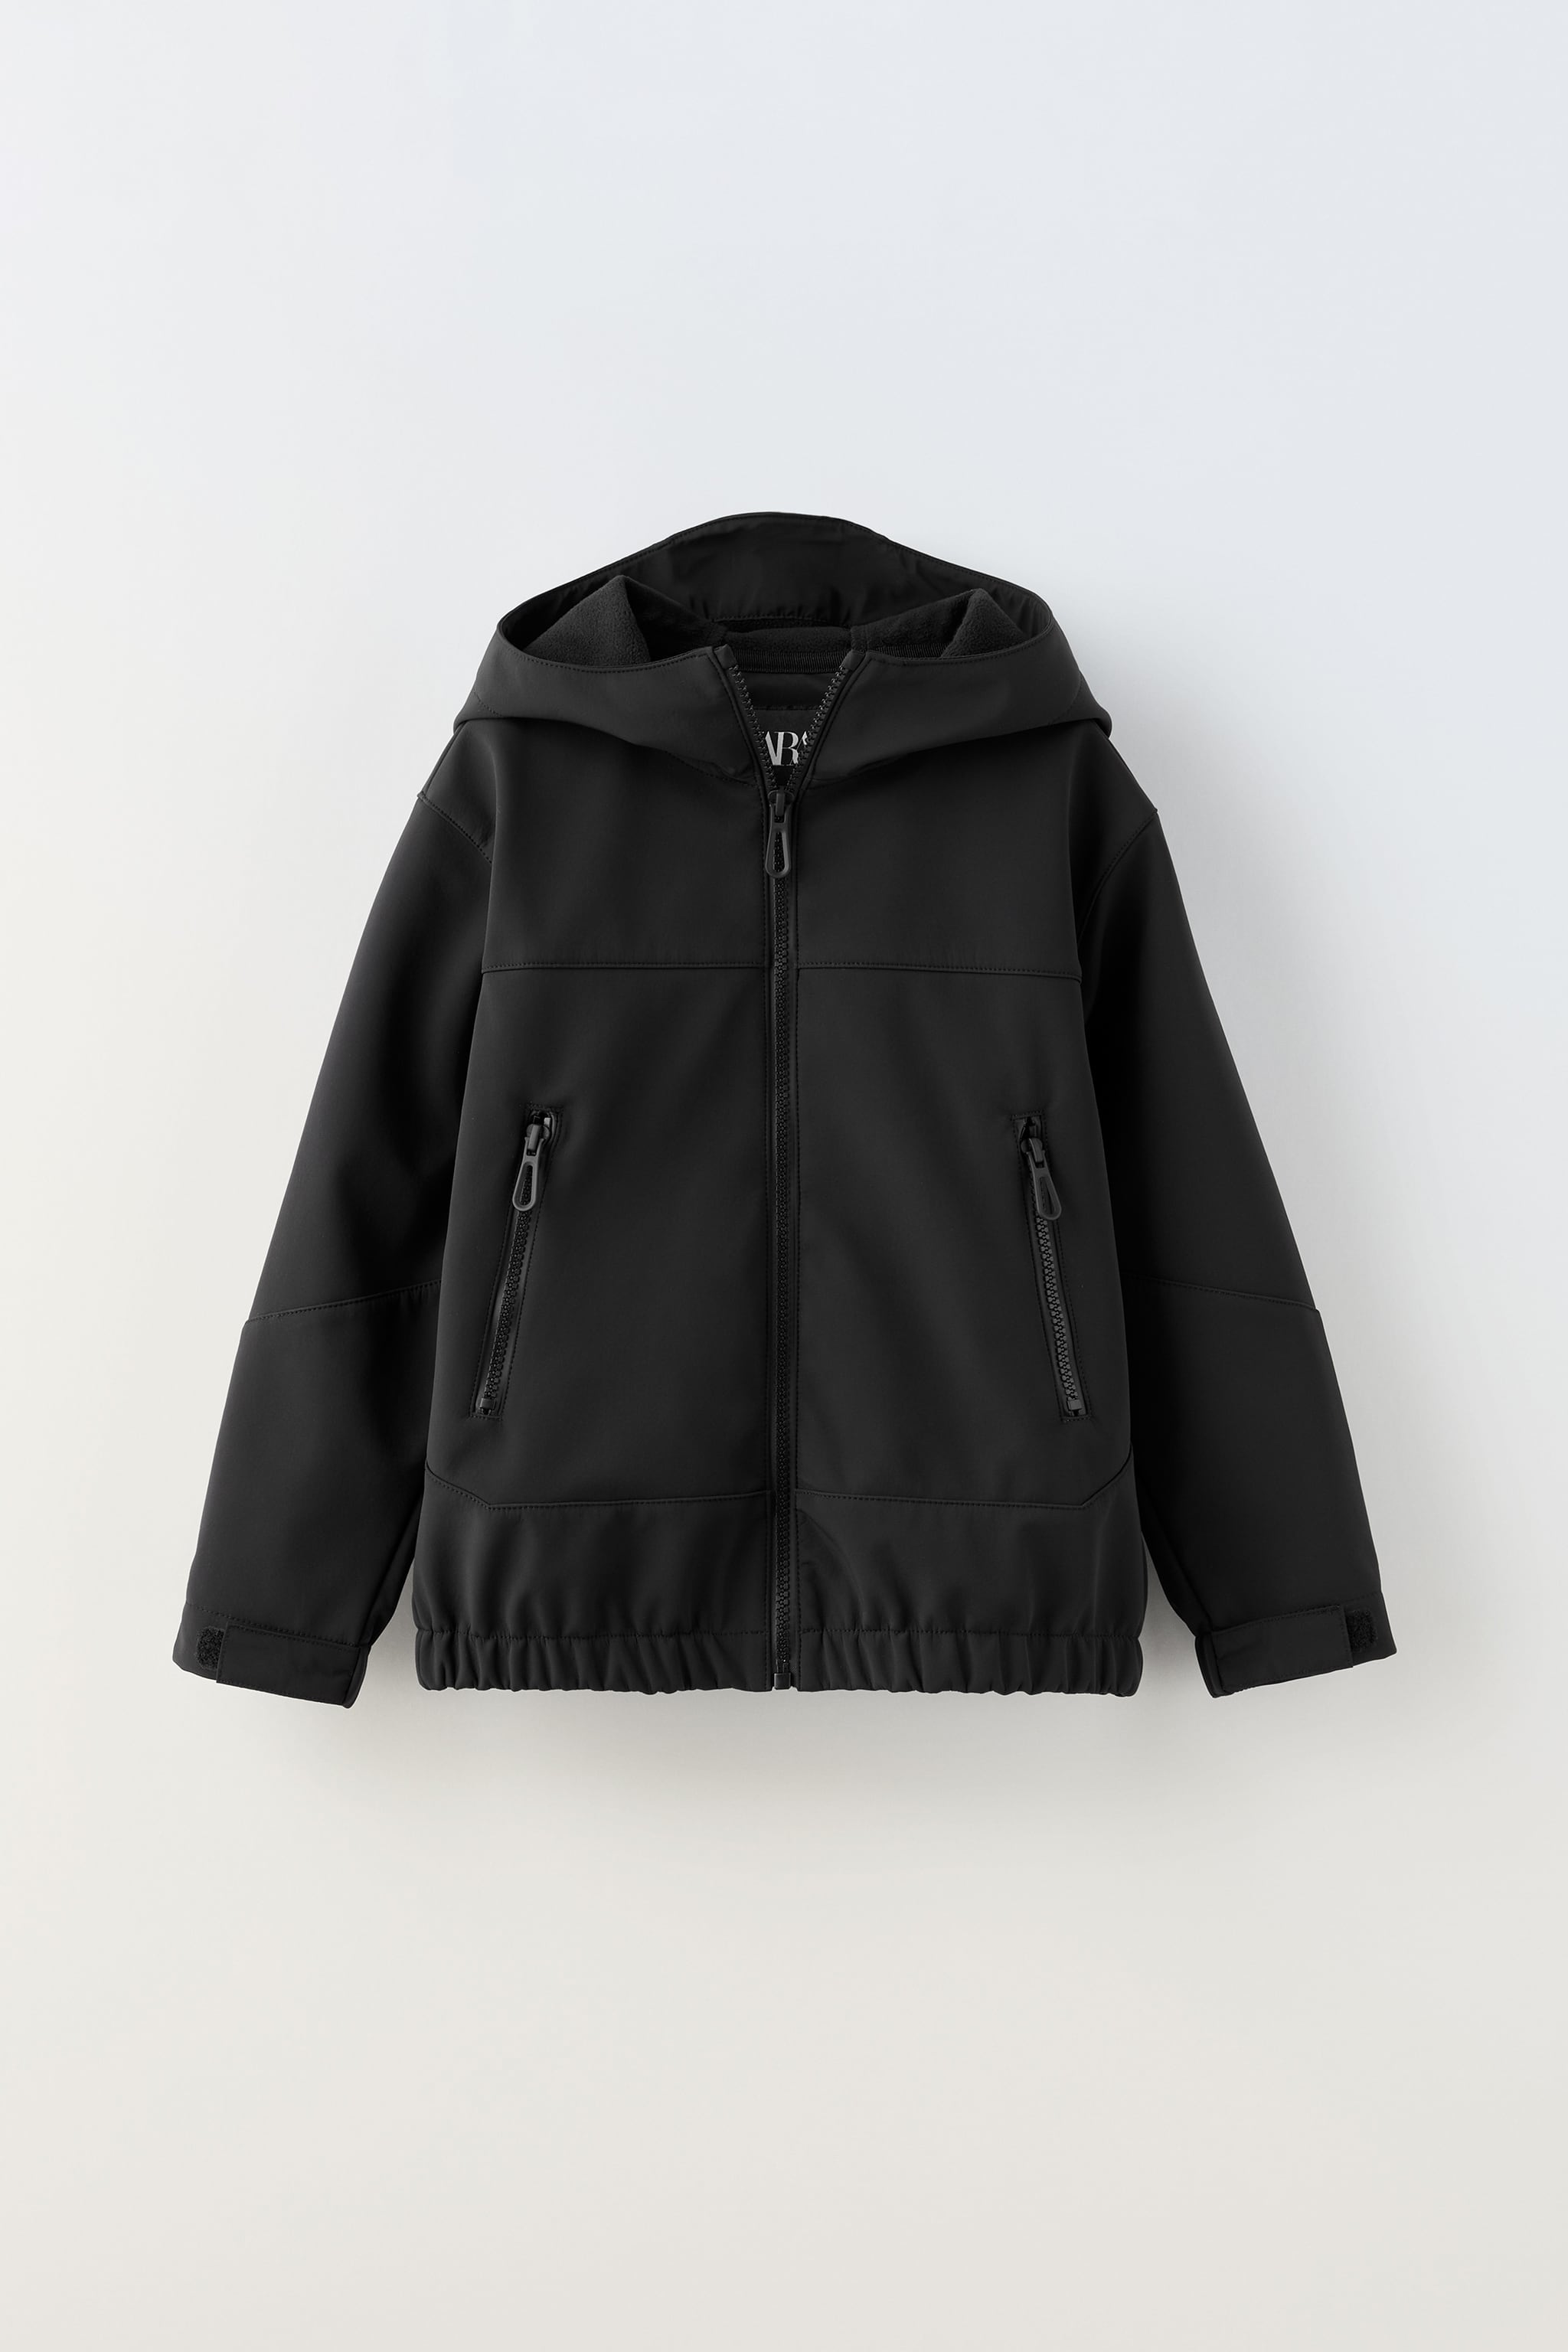 WATER REPELLENT SOFT TECHNICAL JACKET